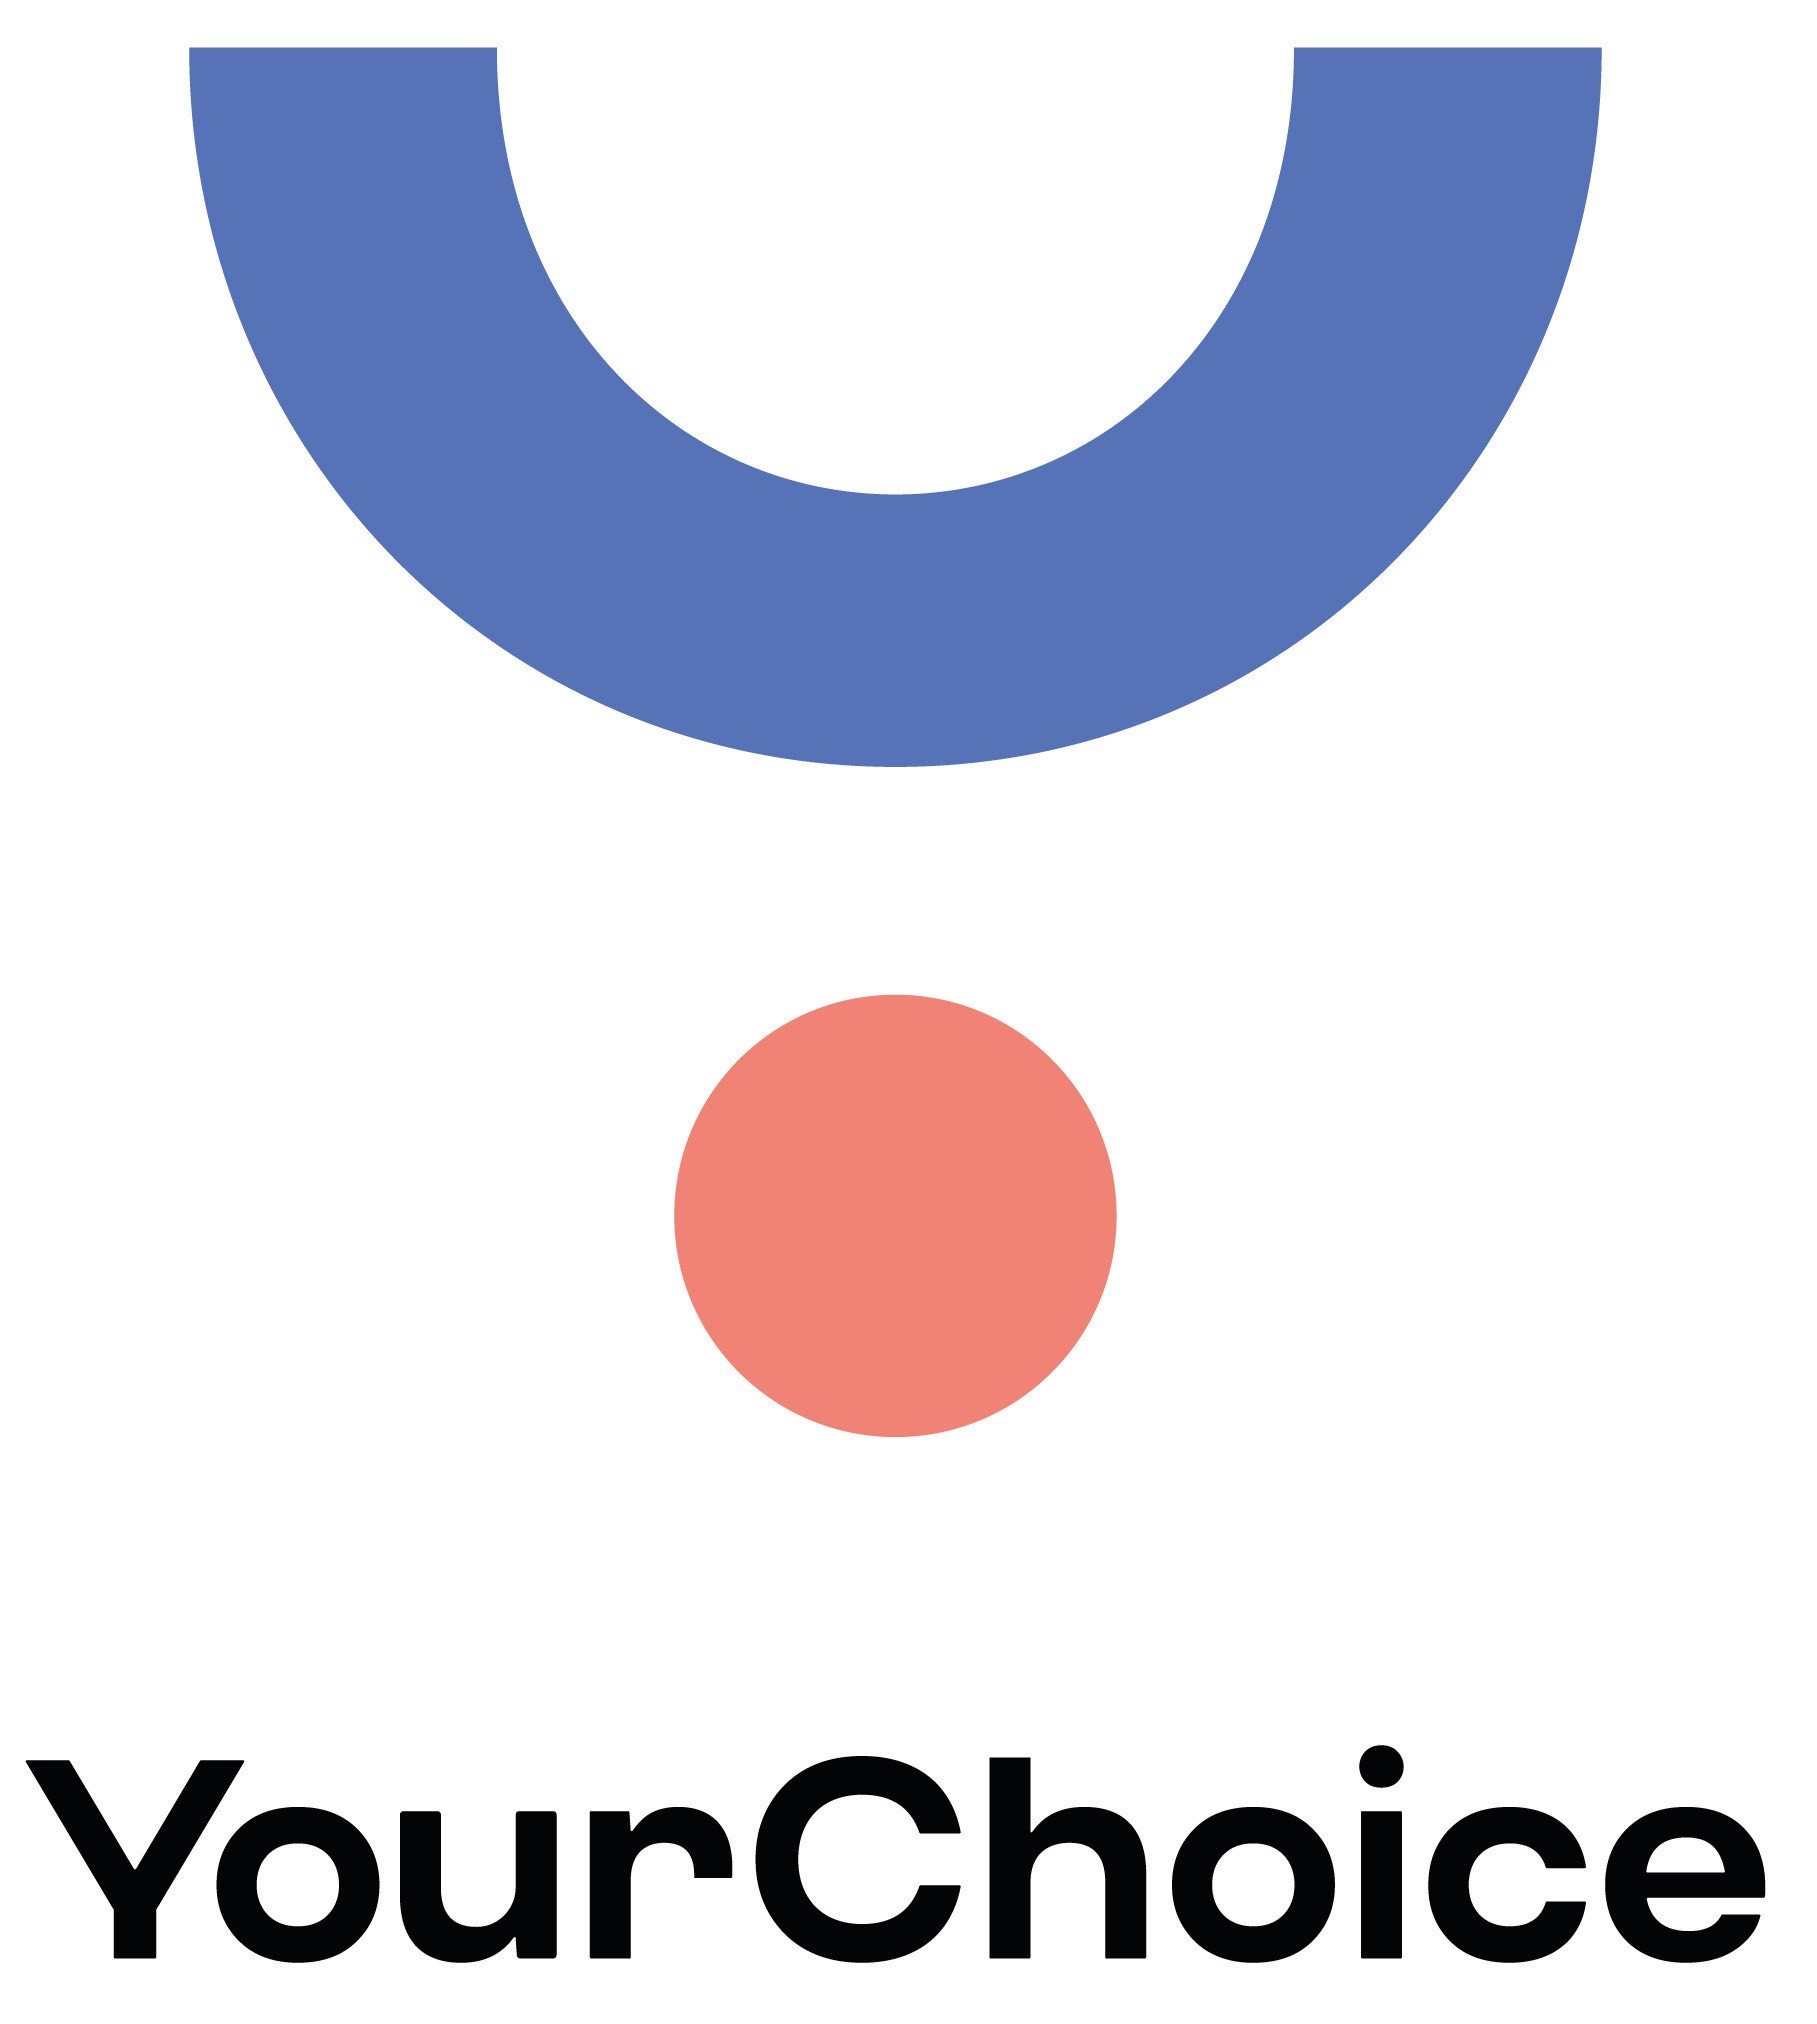 YourChoice Therapeutics, Monday, May 9, 2022, Press release picture